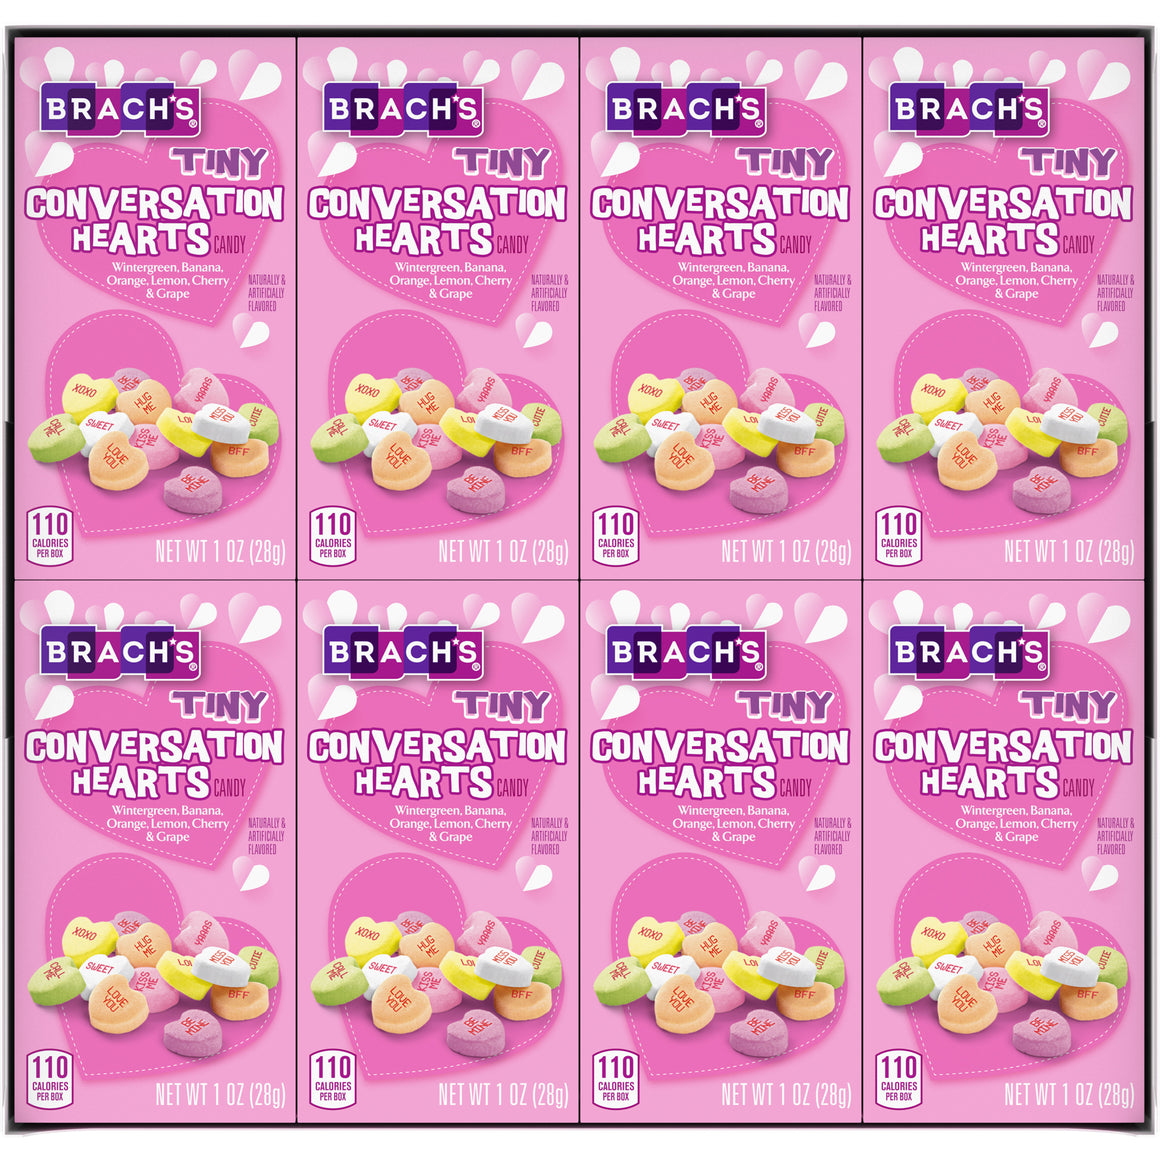 Conversation Hearts (all sizes) –